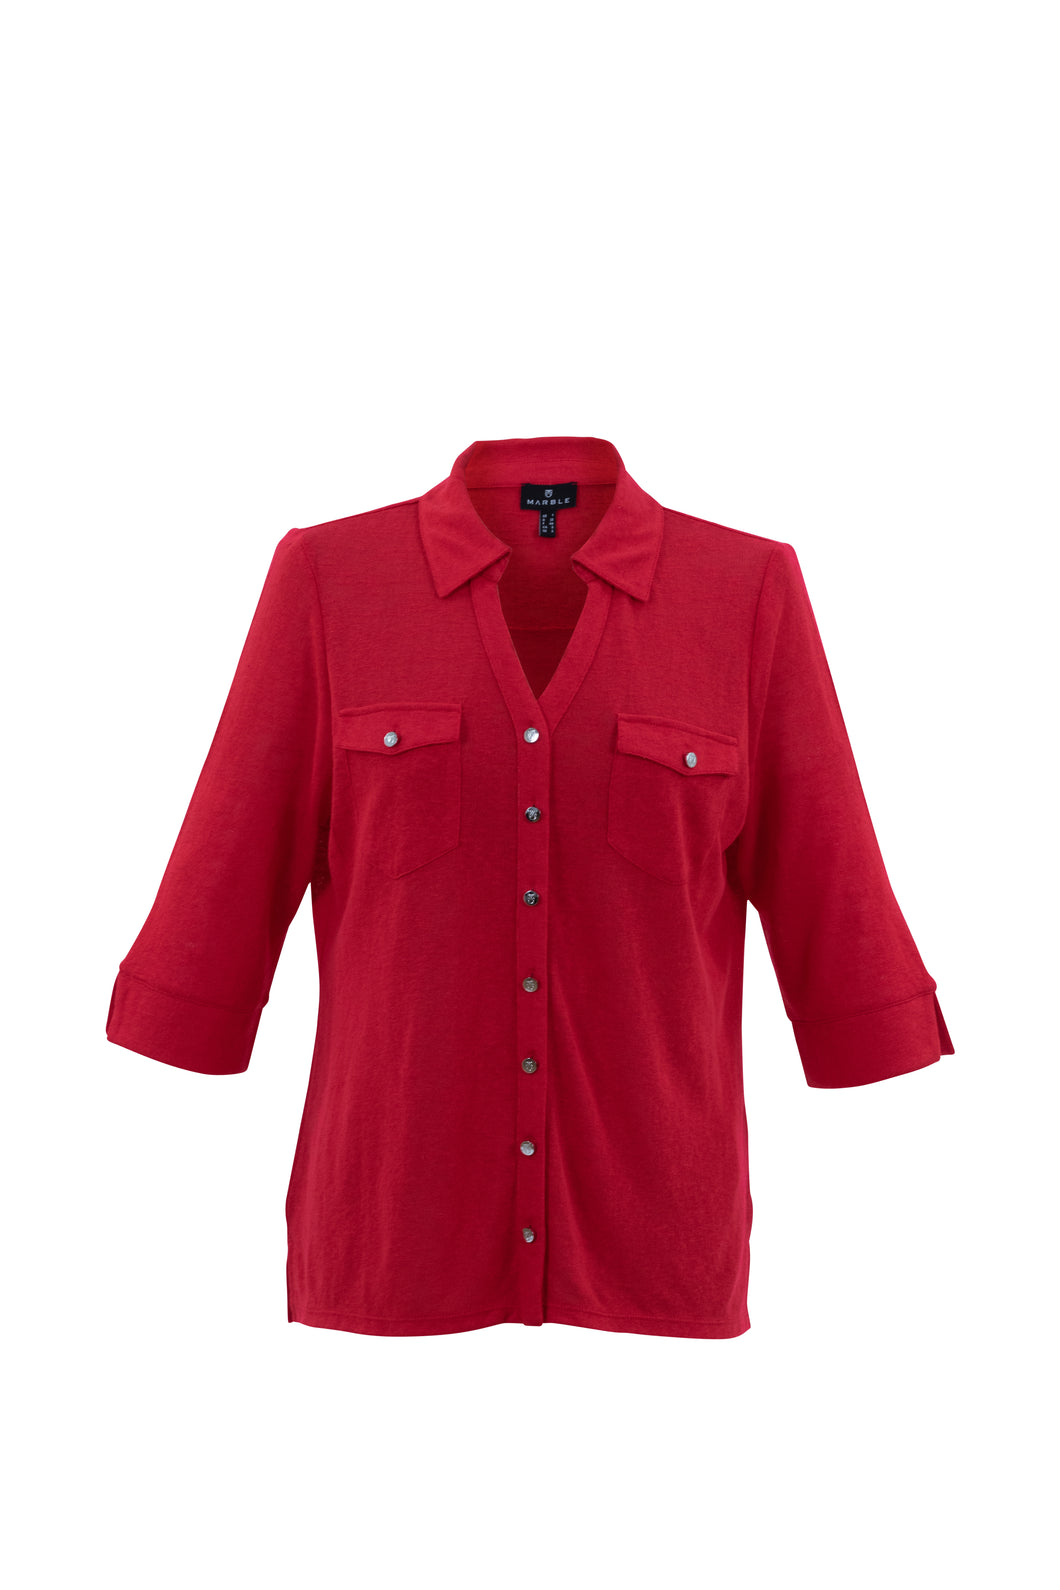 Marble Red Elbow Sleeve Polo Shirt With Branded Buttons and Chest Patch Pocket